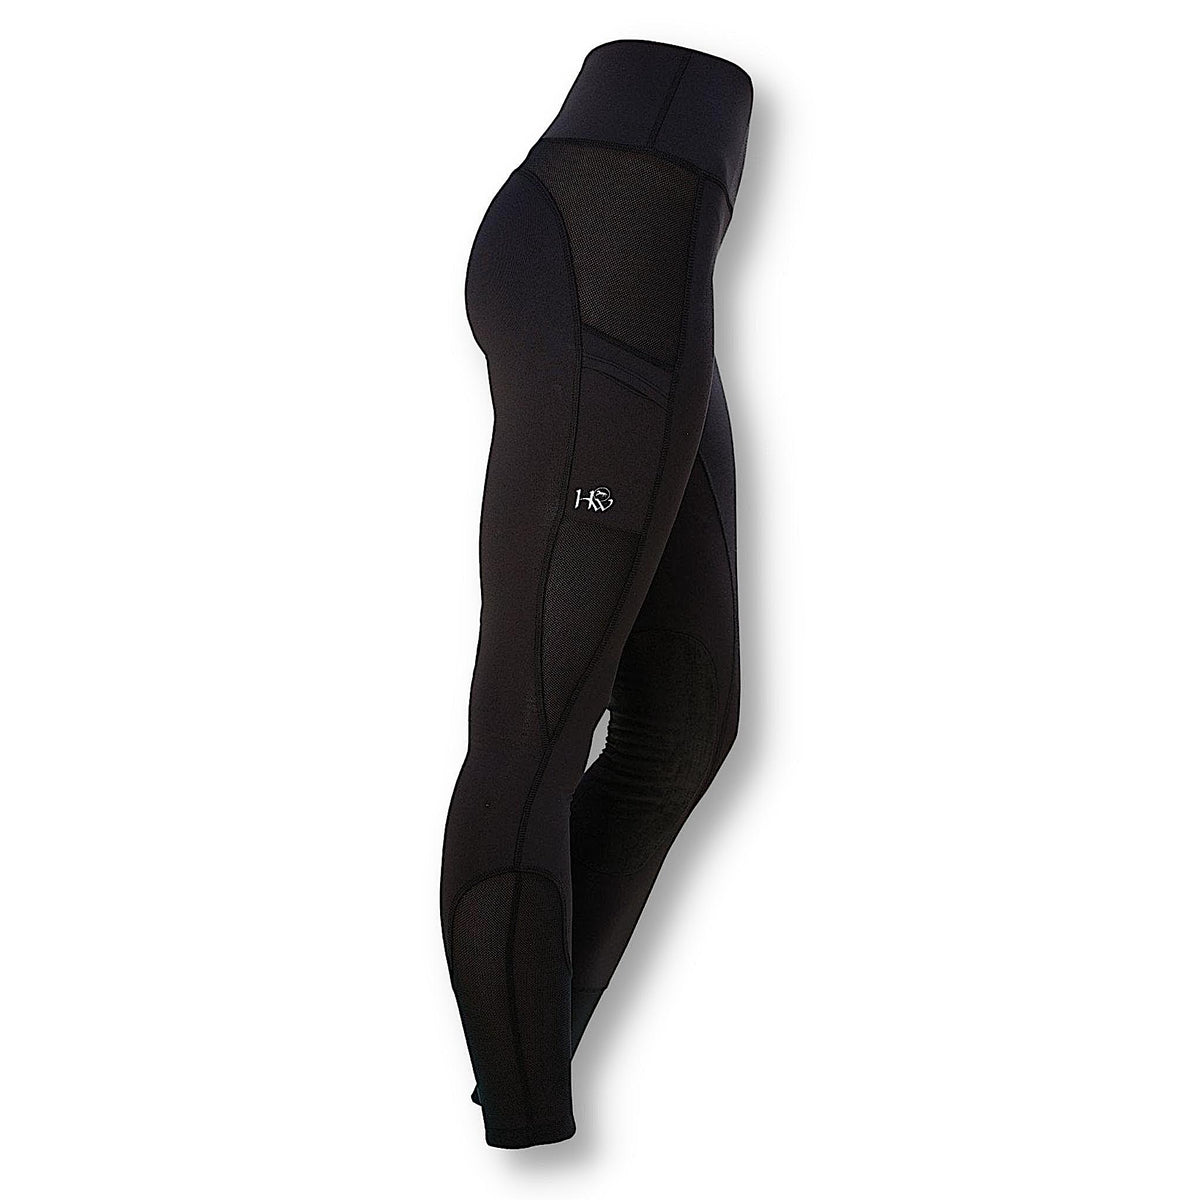 Side of black riding tights with small silver logo and mesh sections.